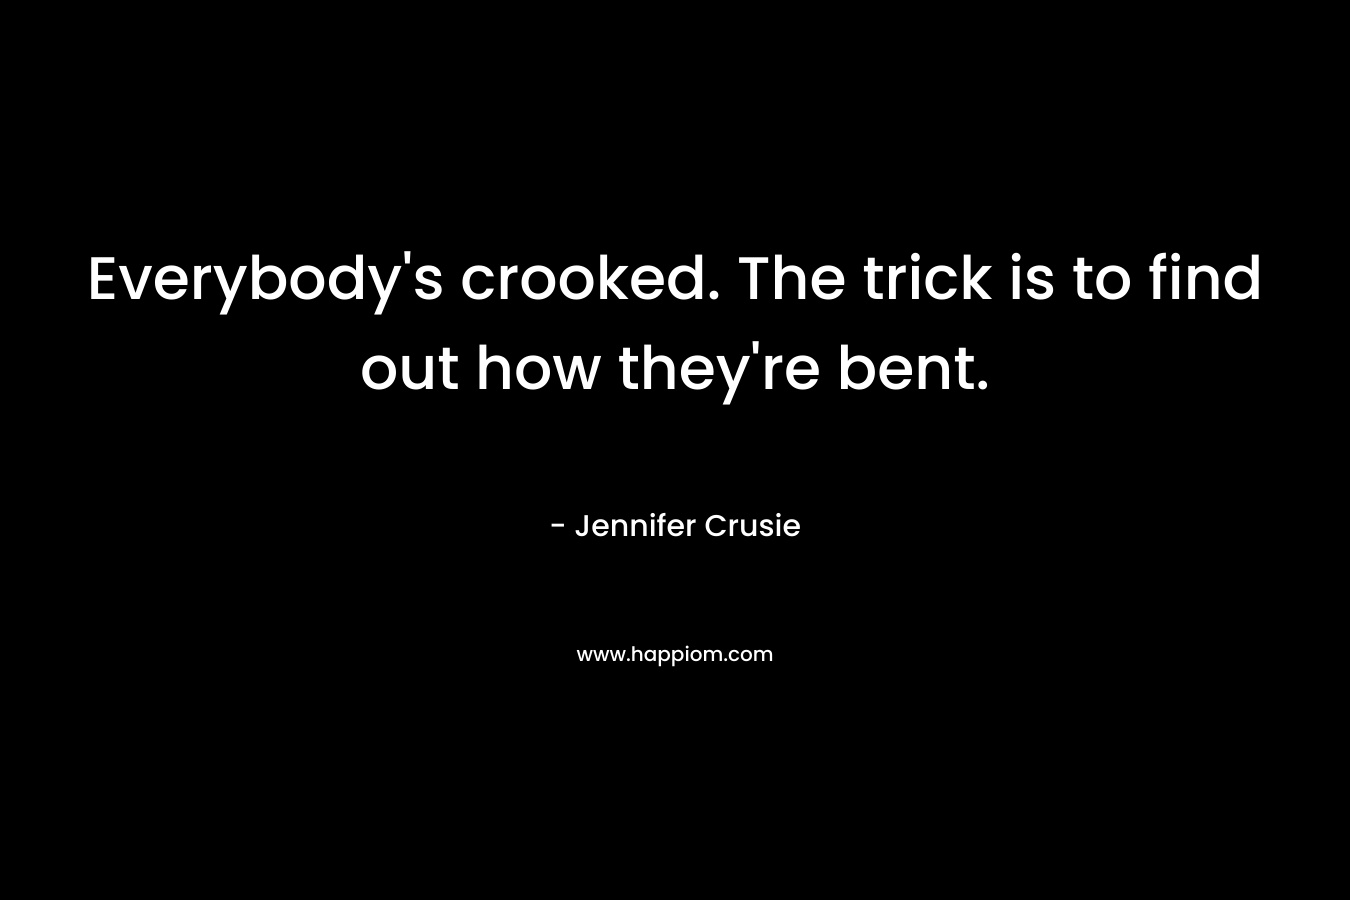 Everybody's crooked. The trick is to find out how they're bent.